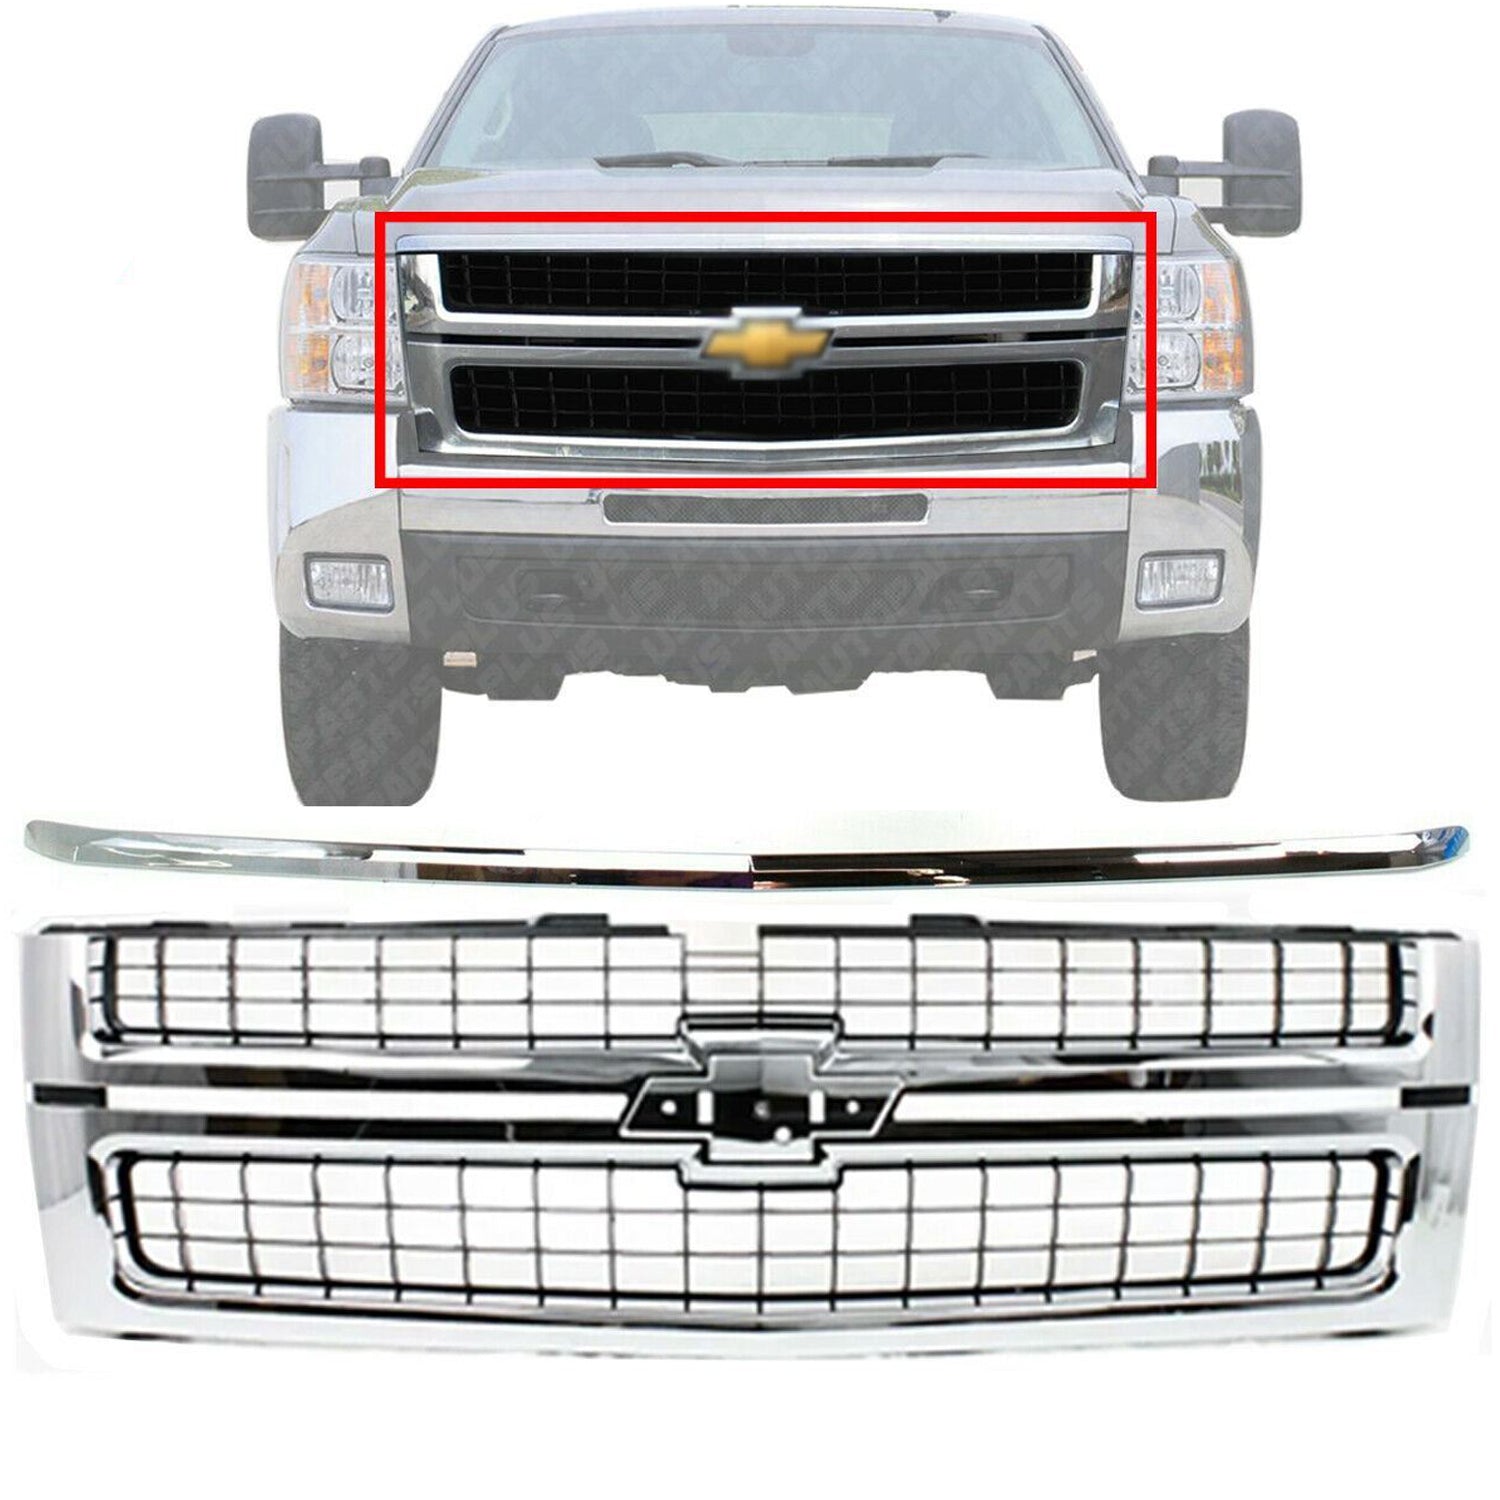 Front Grille Chrome Plastic + Hood Molding For 2007-2010 Silverado